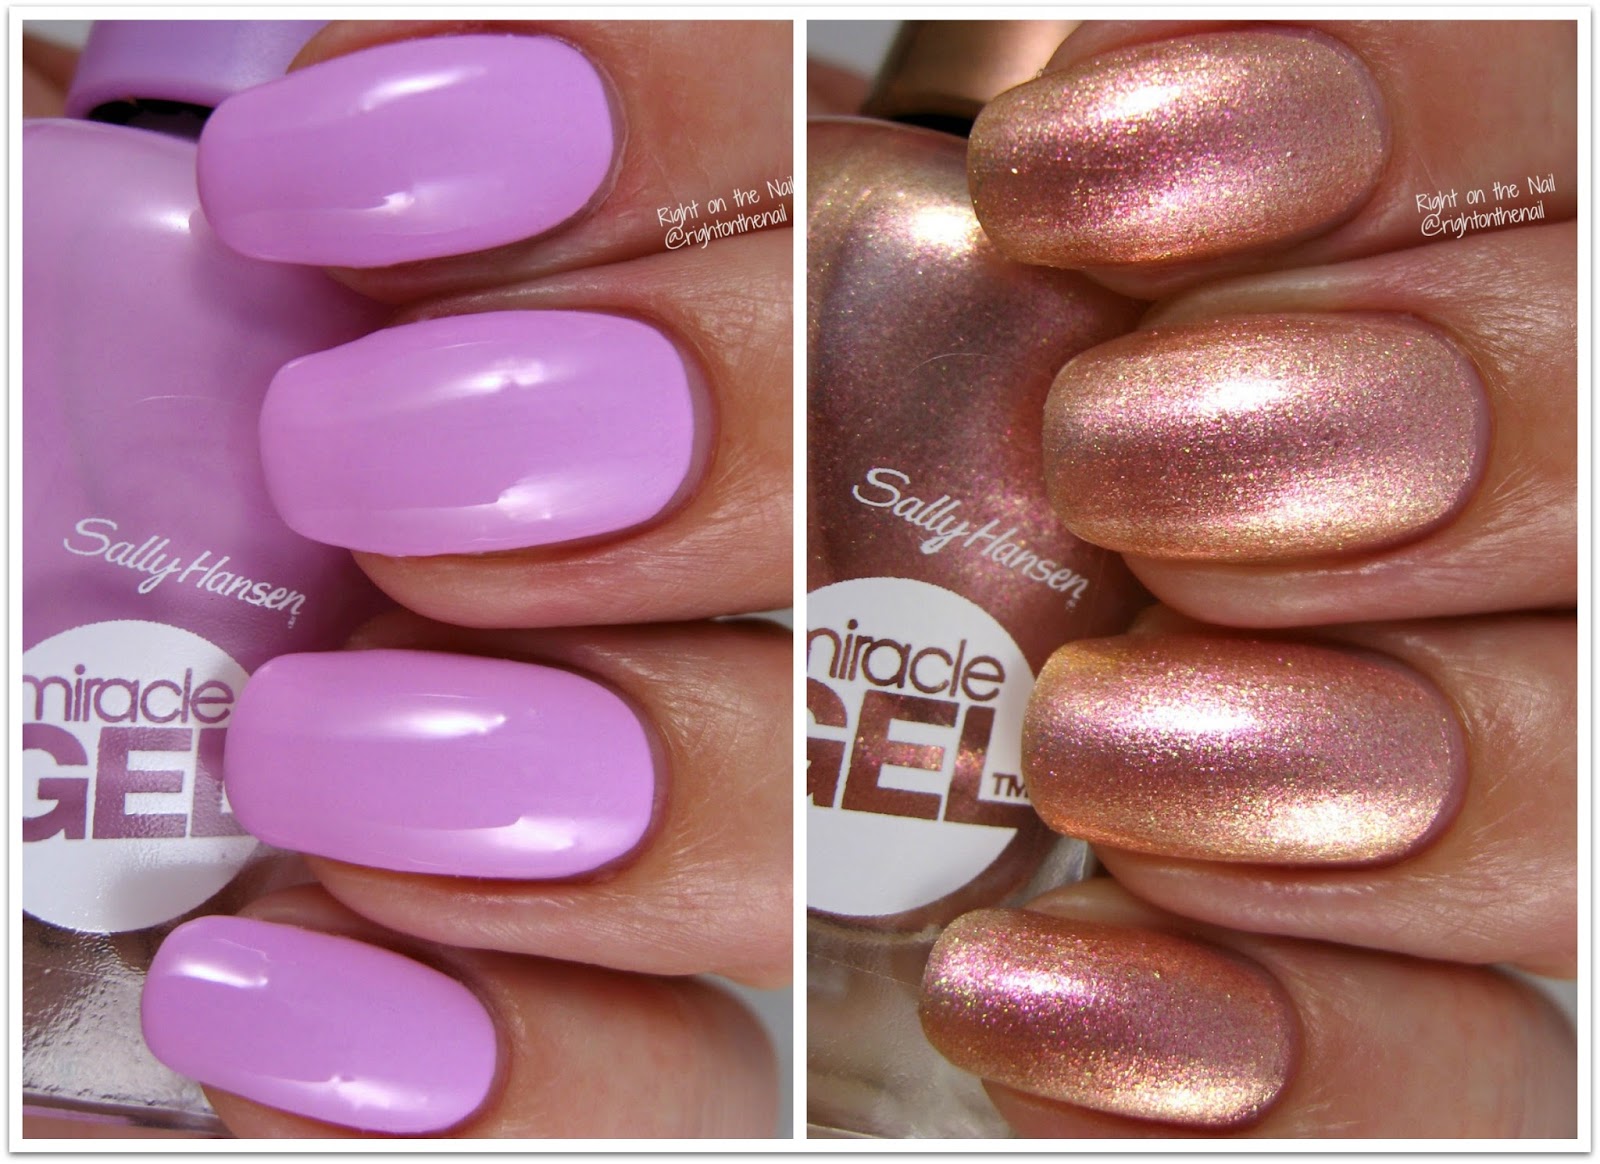 Right on the Nail: Sally Hansen Miracle Gel Travel Stories Romantic  Rendezvous Collection Swatches and Reviews: Orchid-ing Aside and Shhhhimmer